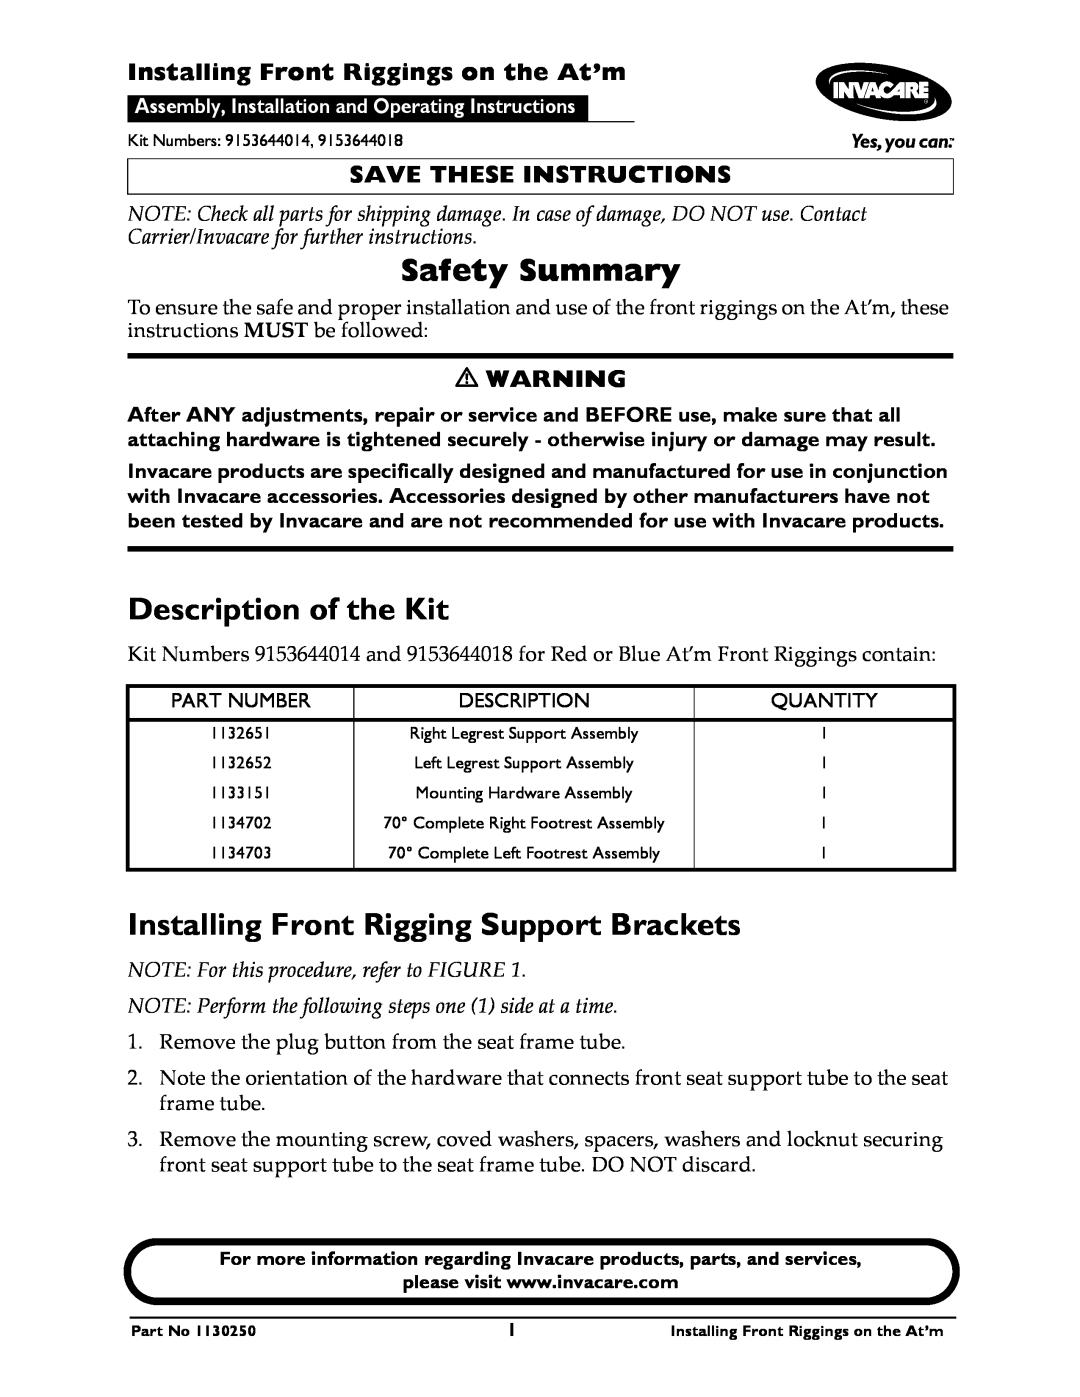 Invacare 9153644018 operating instructions Safety Summary, Description of the Kit, Installing Front Riggings on the At’m 